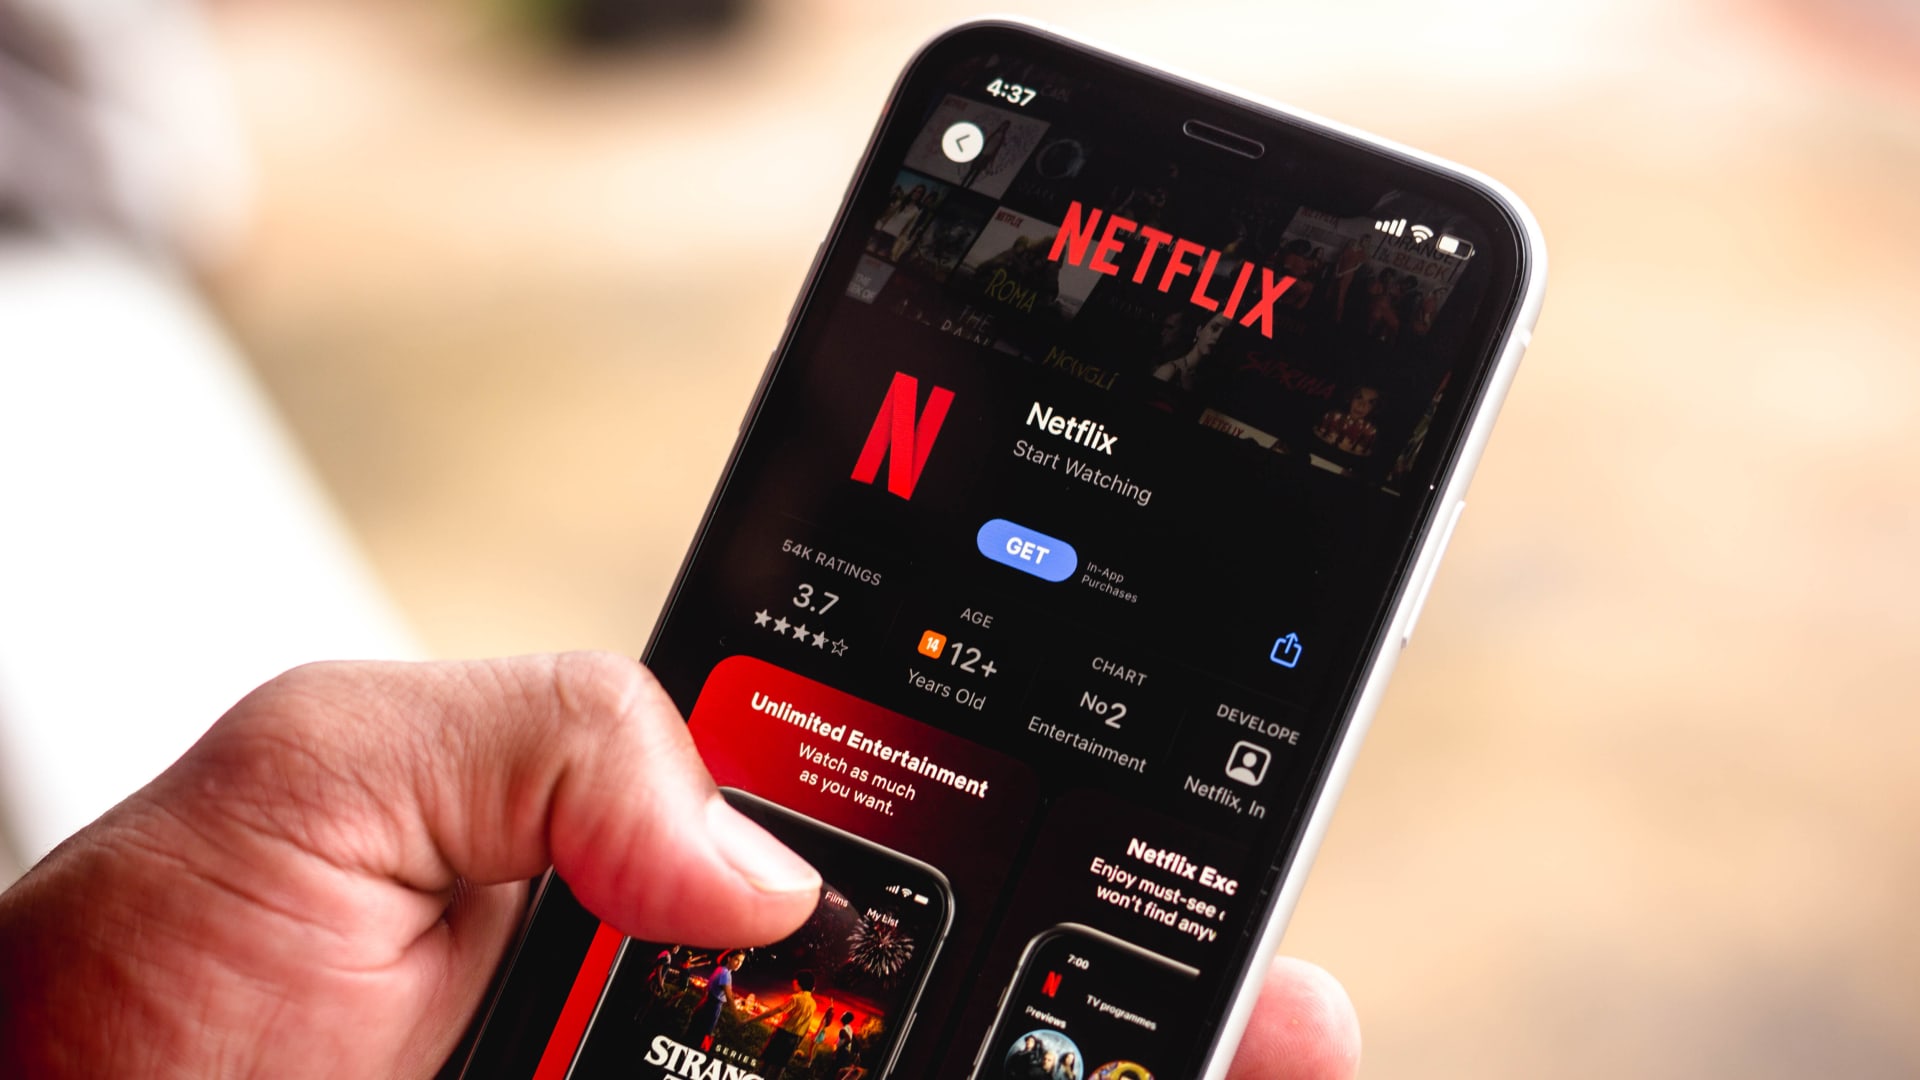 Netflix adds more than 2.4 million subscribers, reveals details about password-sharing crackdown